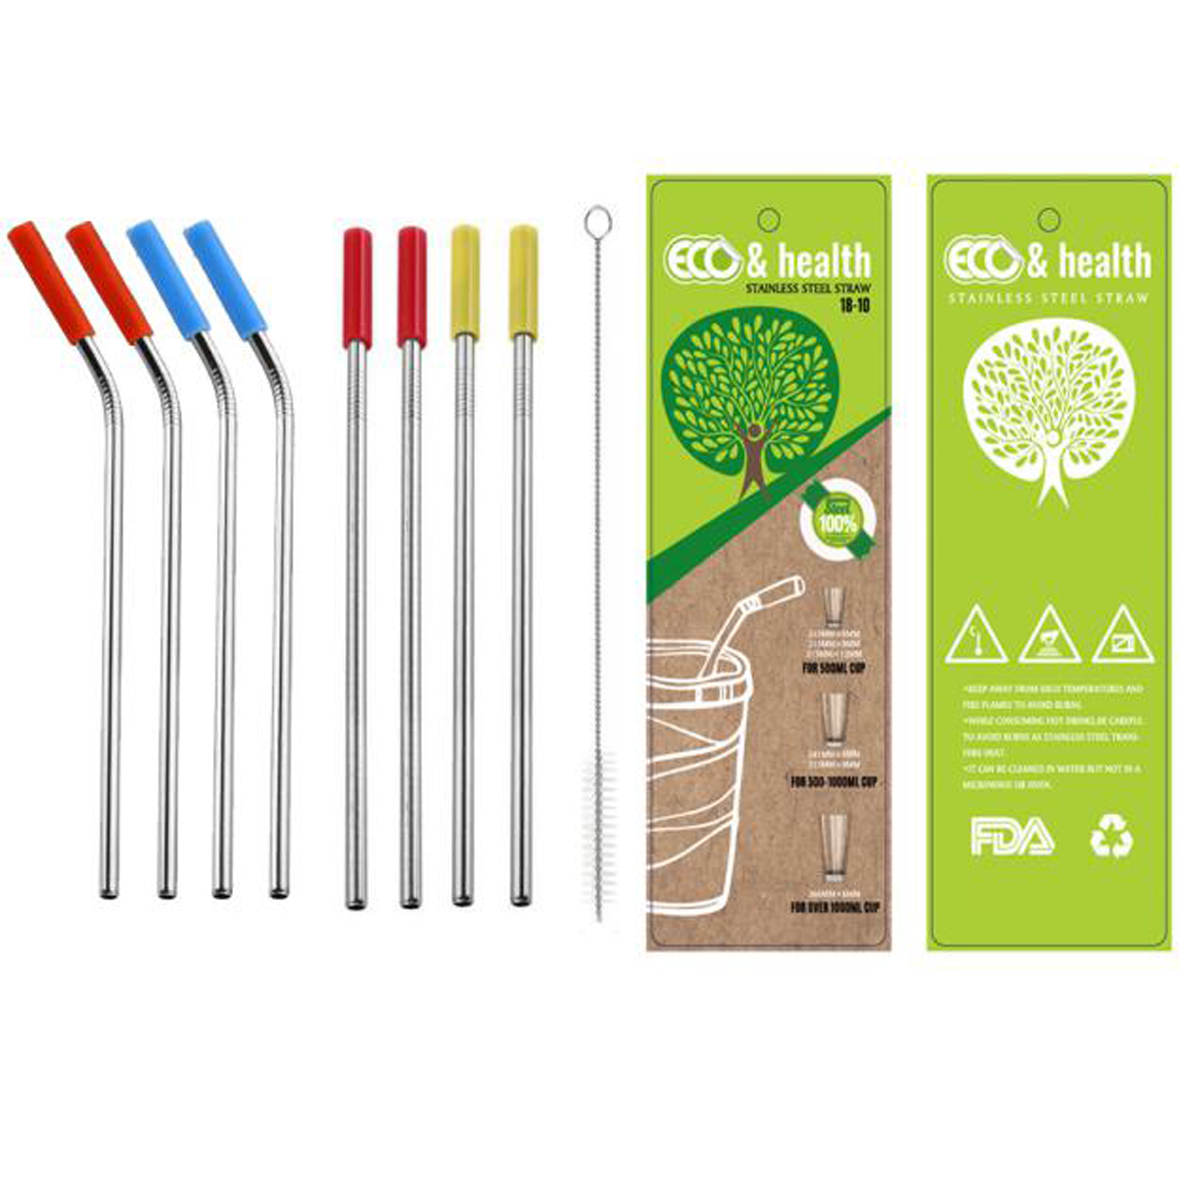 GL-ELY1271 9 in 1 Metal Straw Set with Blister Package